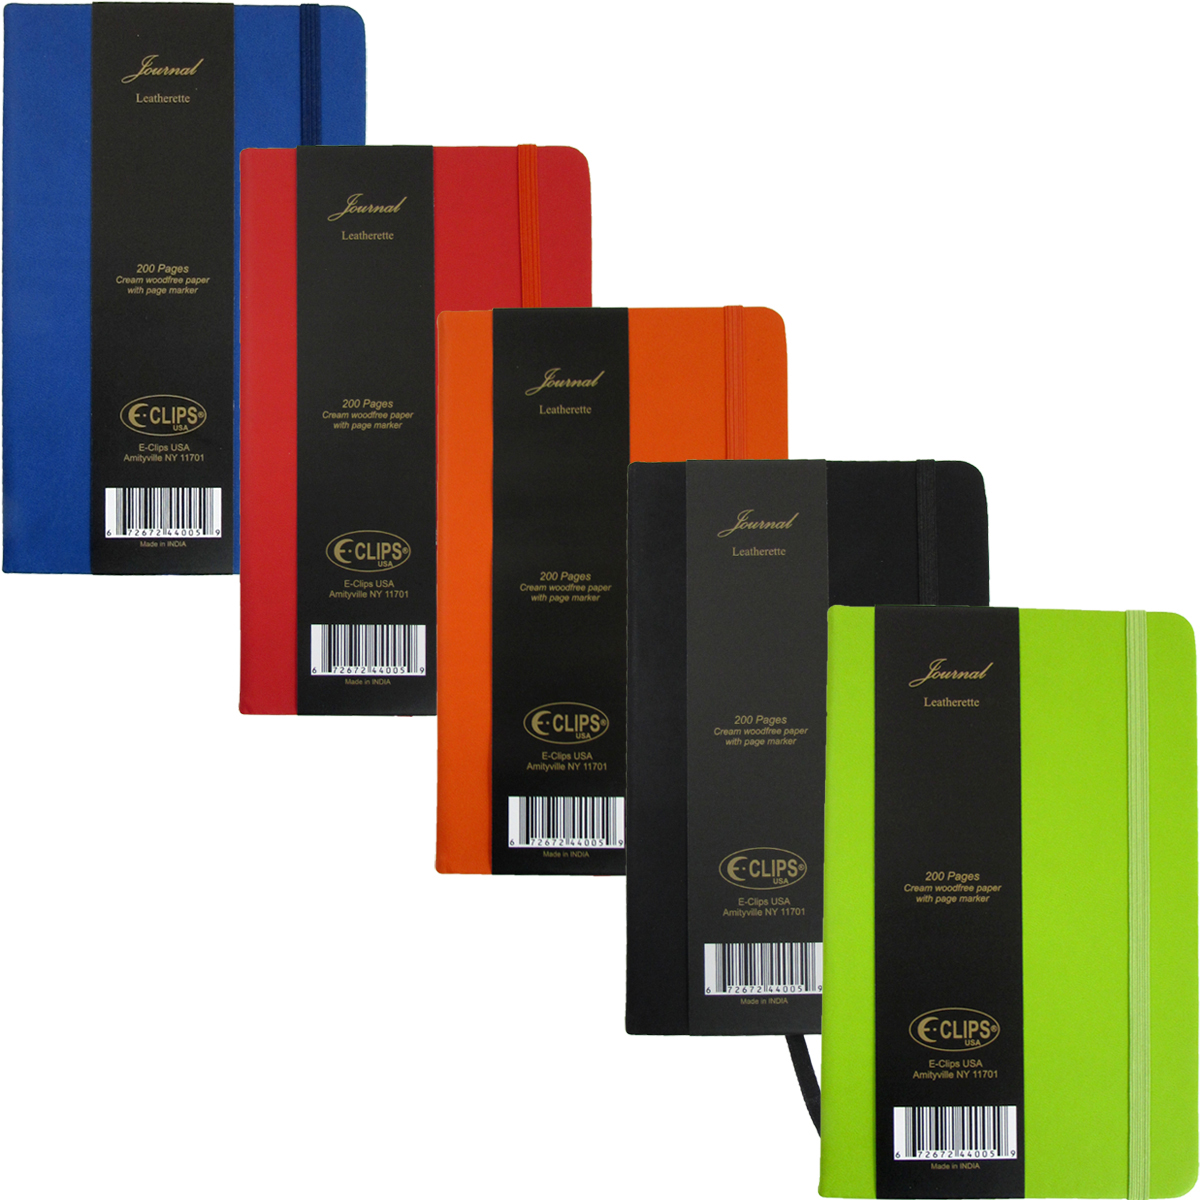 ''6'''' x 4'''' Hardcover Faux Leather Journals w/ Elastic Band Closure & Page Marker''